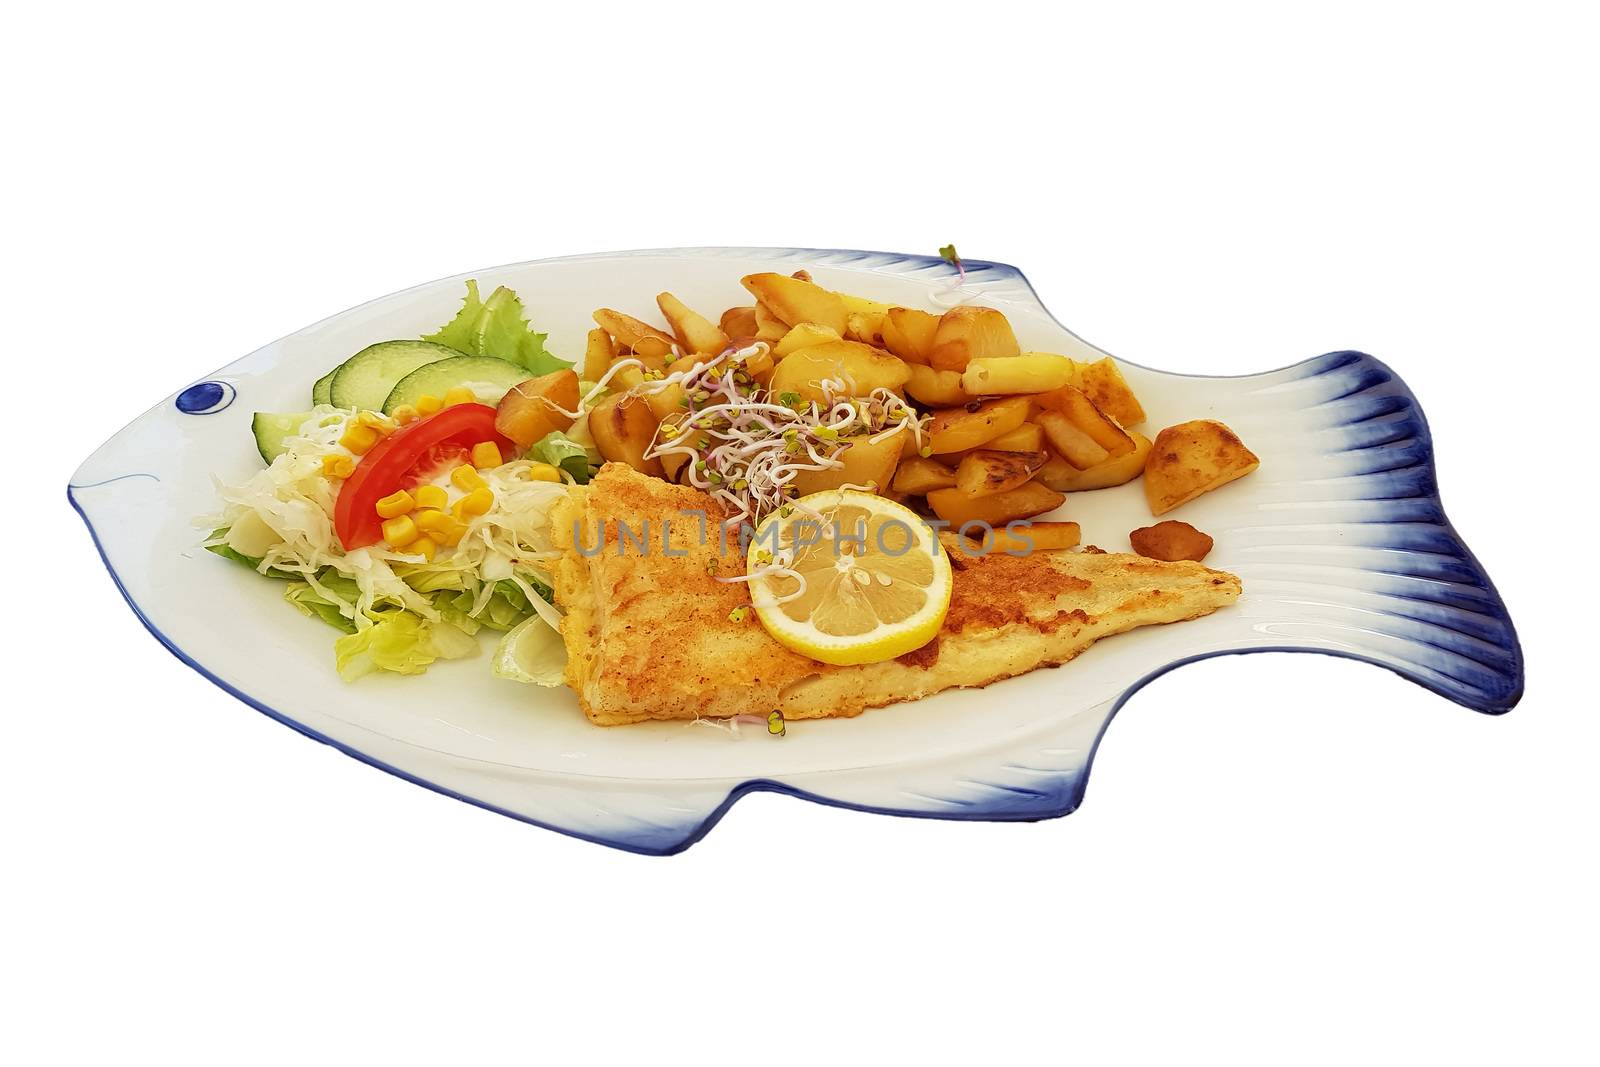 Fried fish with fried potatoes and lemon slices on fish-shaped plate against white background.